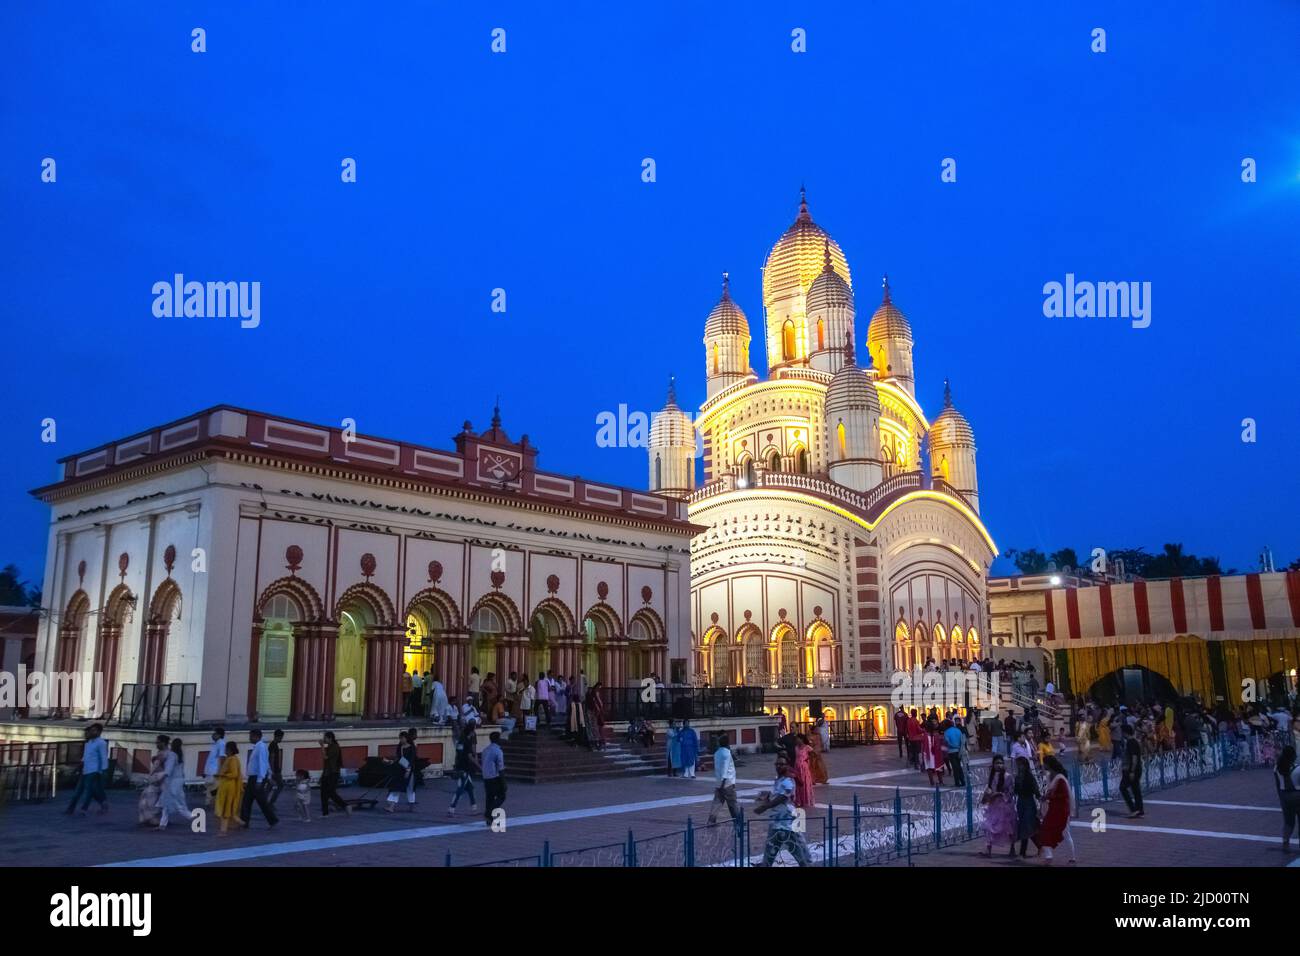 June 16, 2022, Kolkata, West Bengal, India: The Lighting Decoration of Dakshineswar Kali Temple. Dakshineshwar Kali Temple is a Hindu temple located on the eastern banks of the Hooghly River in a small town in the north of Kolkata named Dakshineshwar. The beauty and charm of Dakshineswar Kali Temple is known to be such that a trip to Kolkata is often said to be incomplete without a visit to this temple.While the spiritual history of this temple has the mystic sage and reformer Ramakrishna Paramahansa and his wife Sarada Devi associated with it, the socio-political history associated with the t Stock Photo